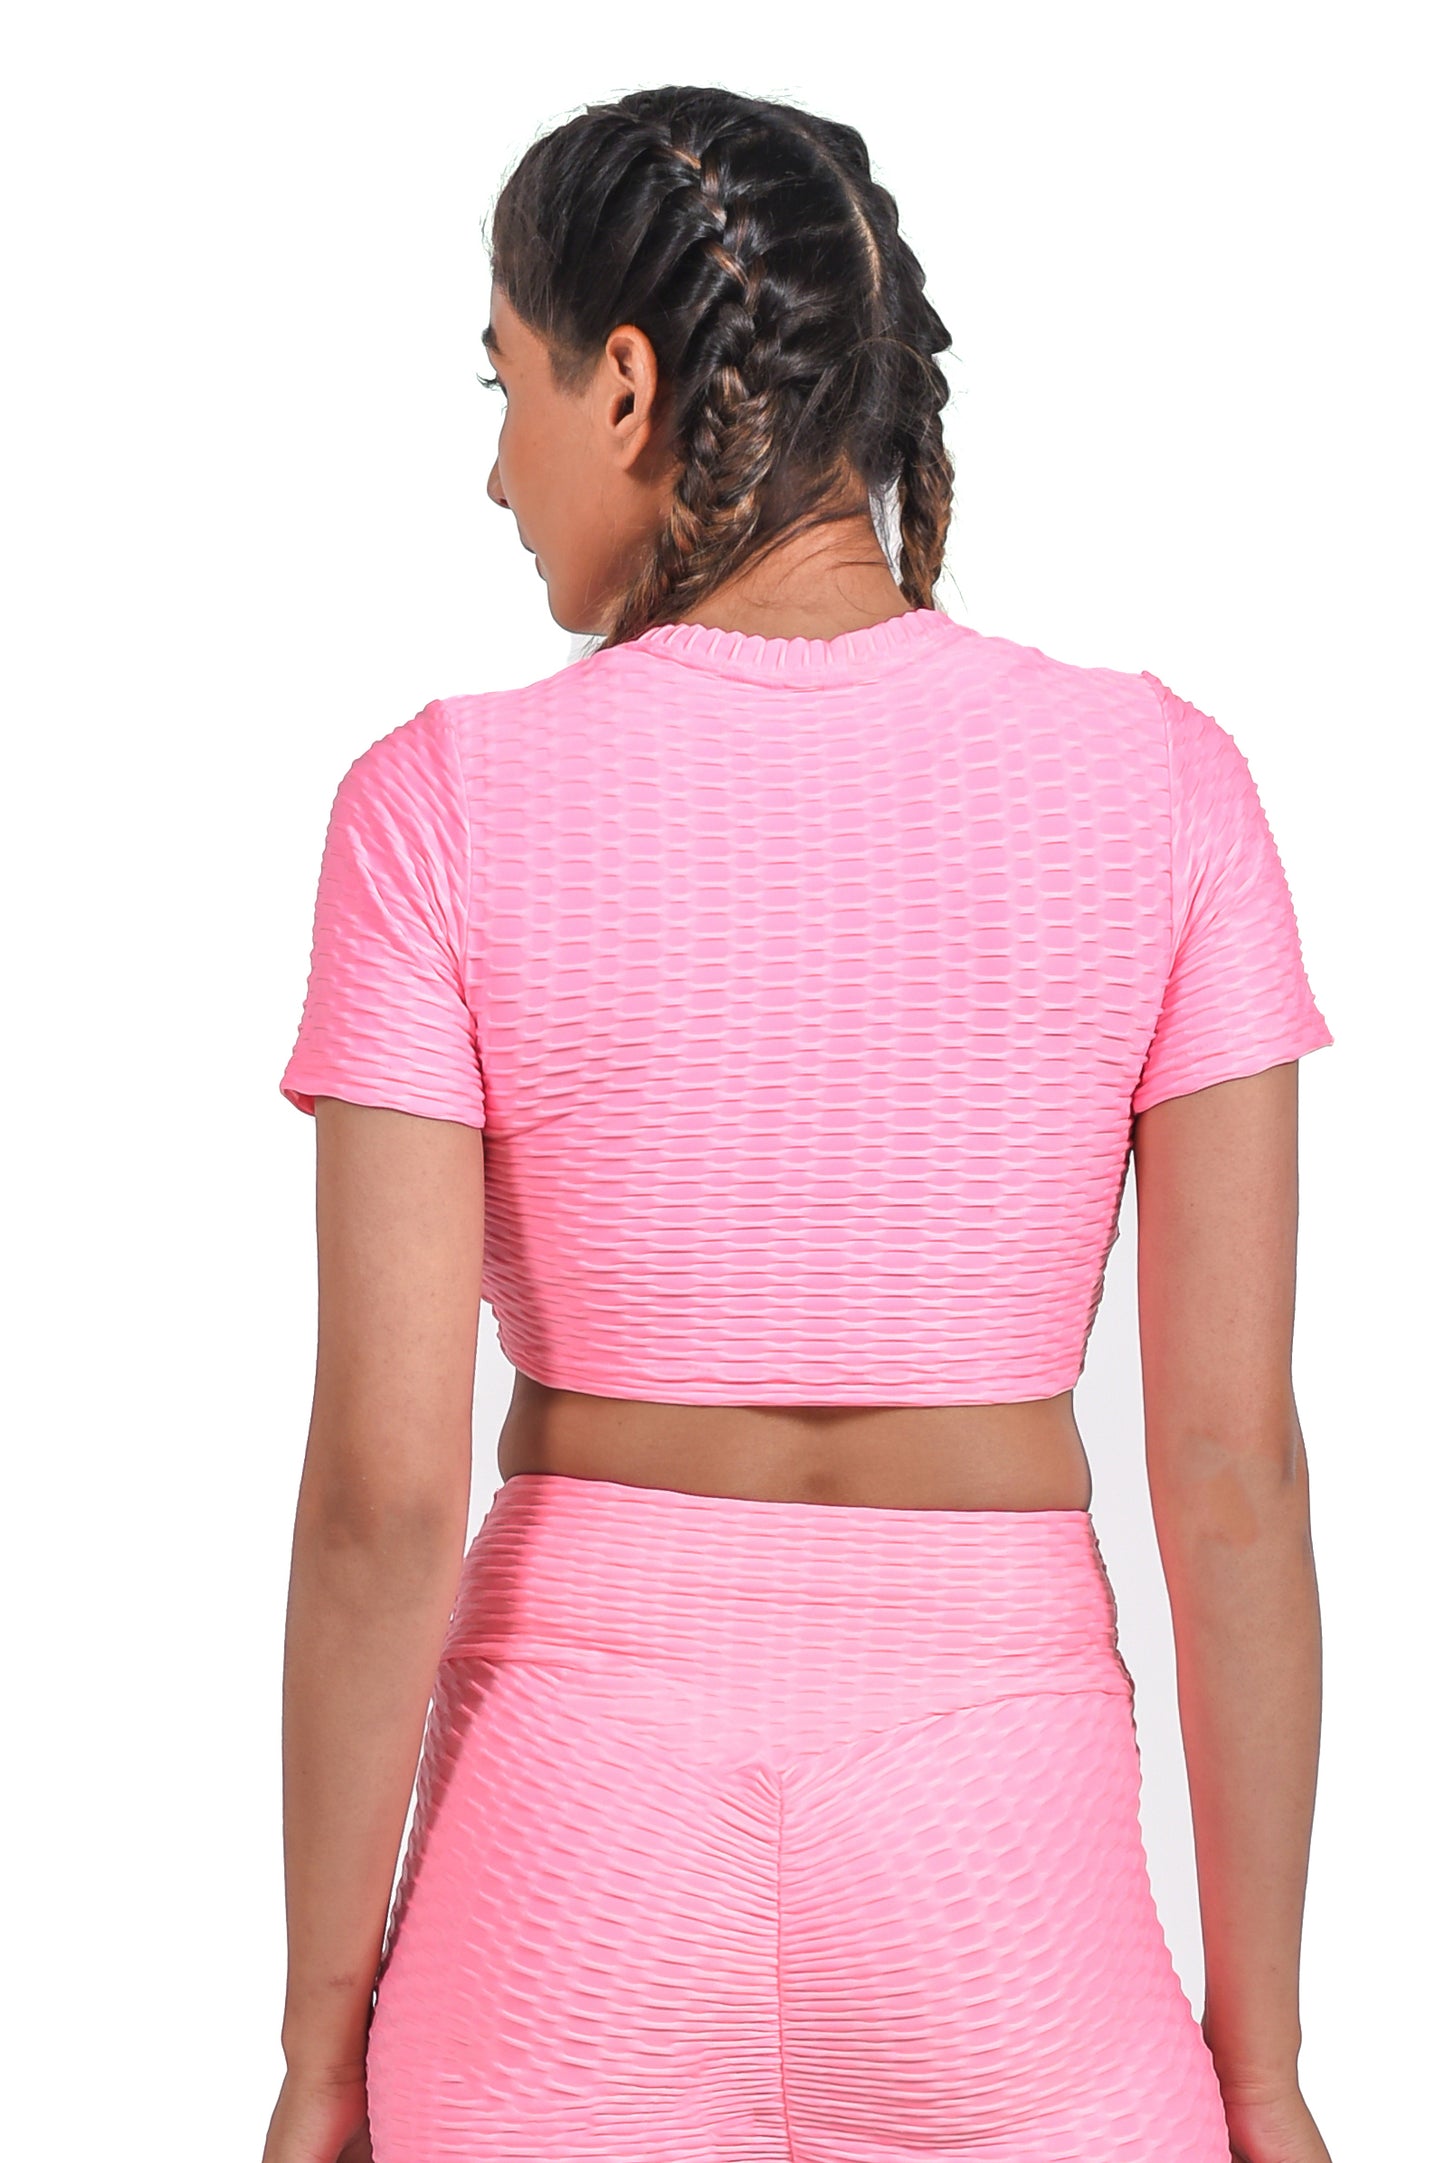 GYMSQUAD® ANTI-CELLULITE T-SHIRT - Pink